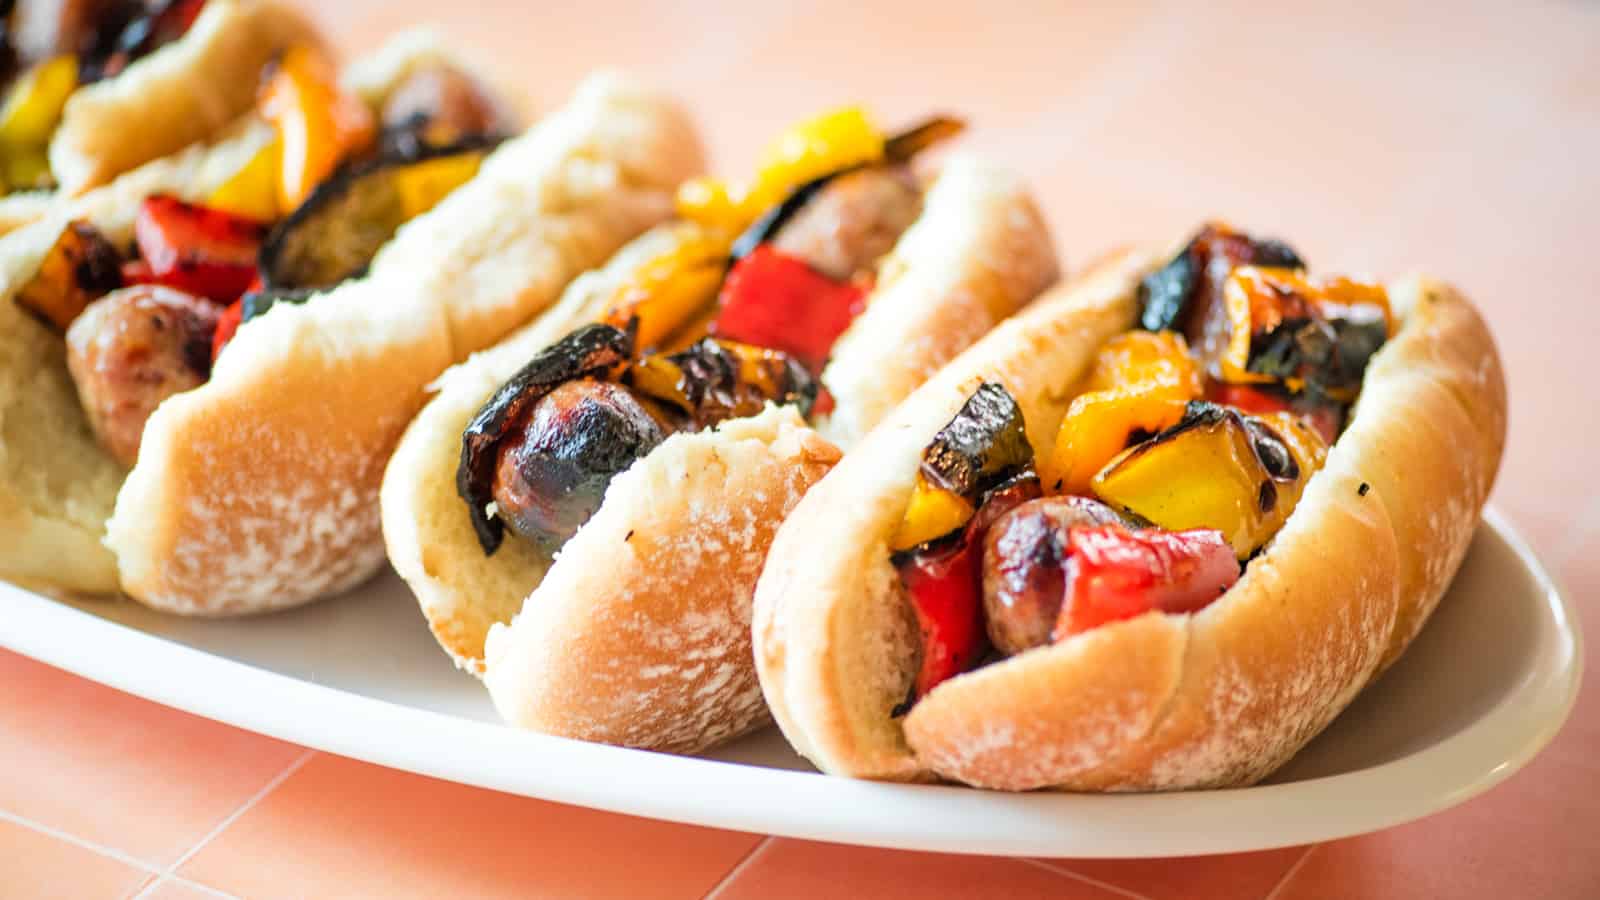 Sausage and peppers sandwiches on a white platter.